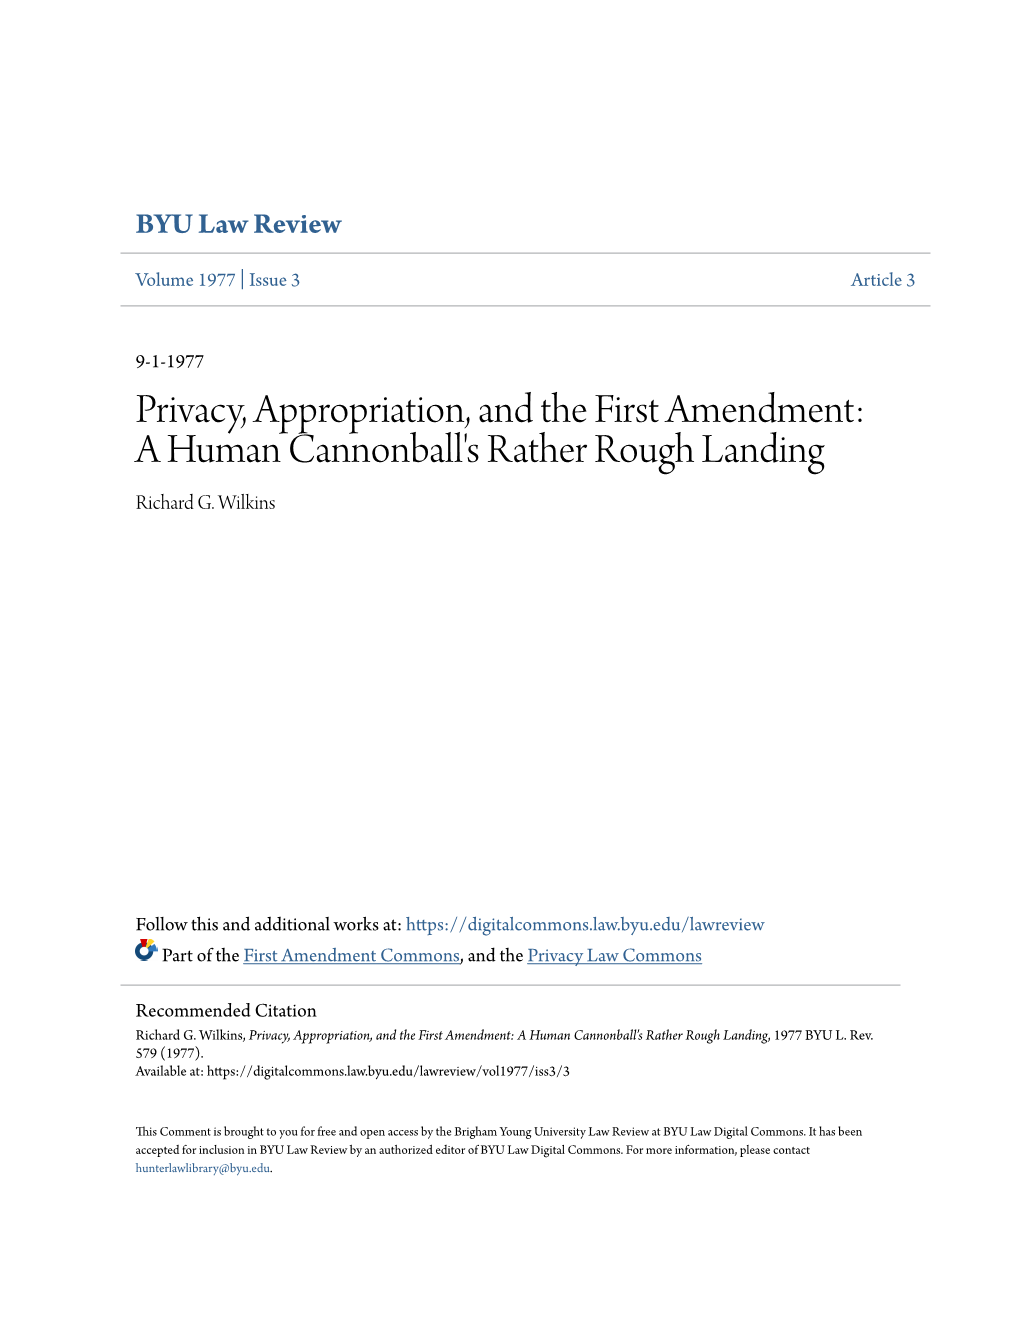 Privacy, Appropriation, and the First Amendment: a Human Cannonball's Rather Rough Landing Richard G